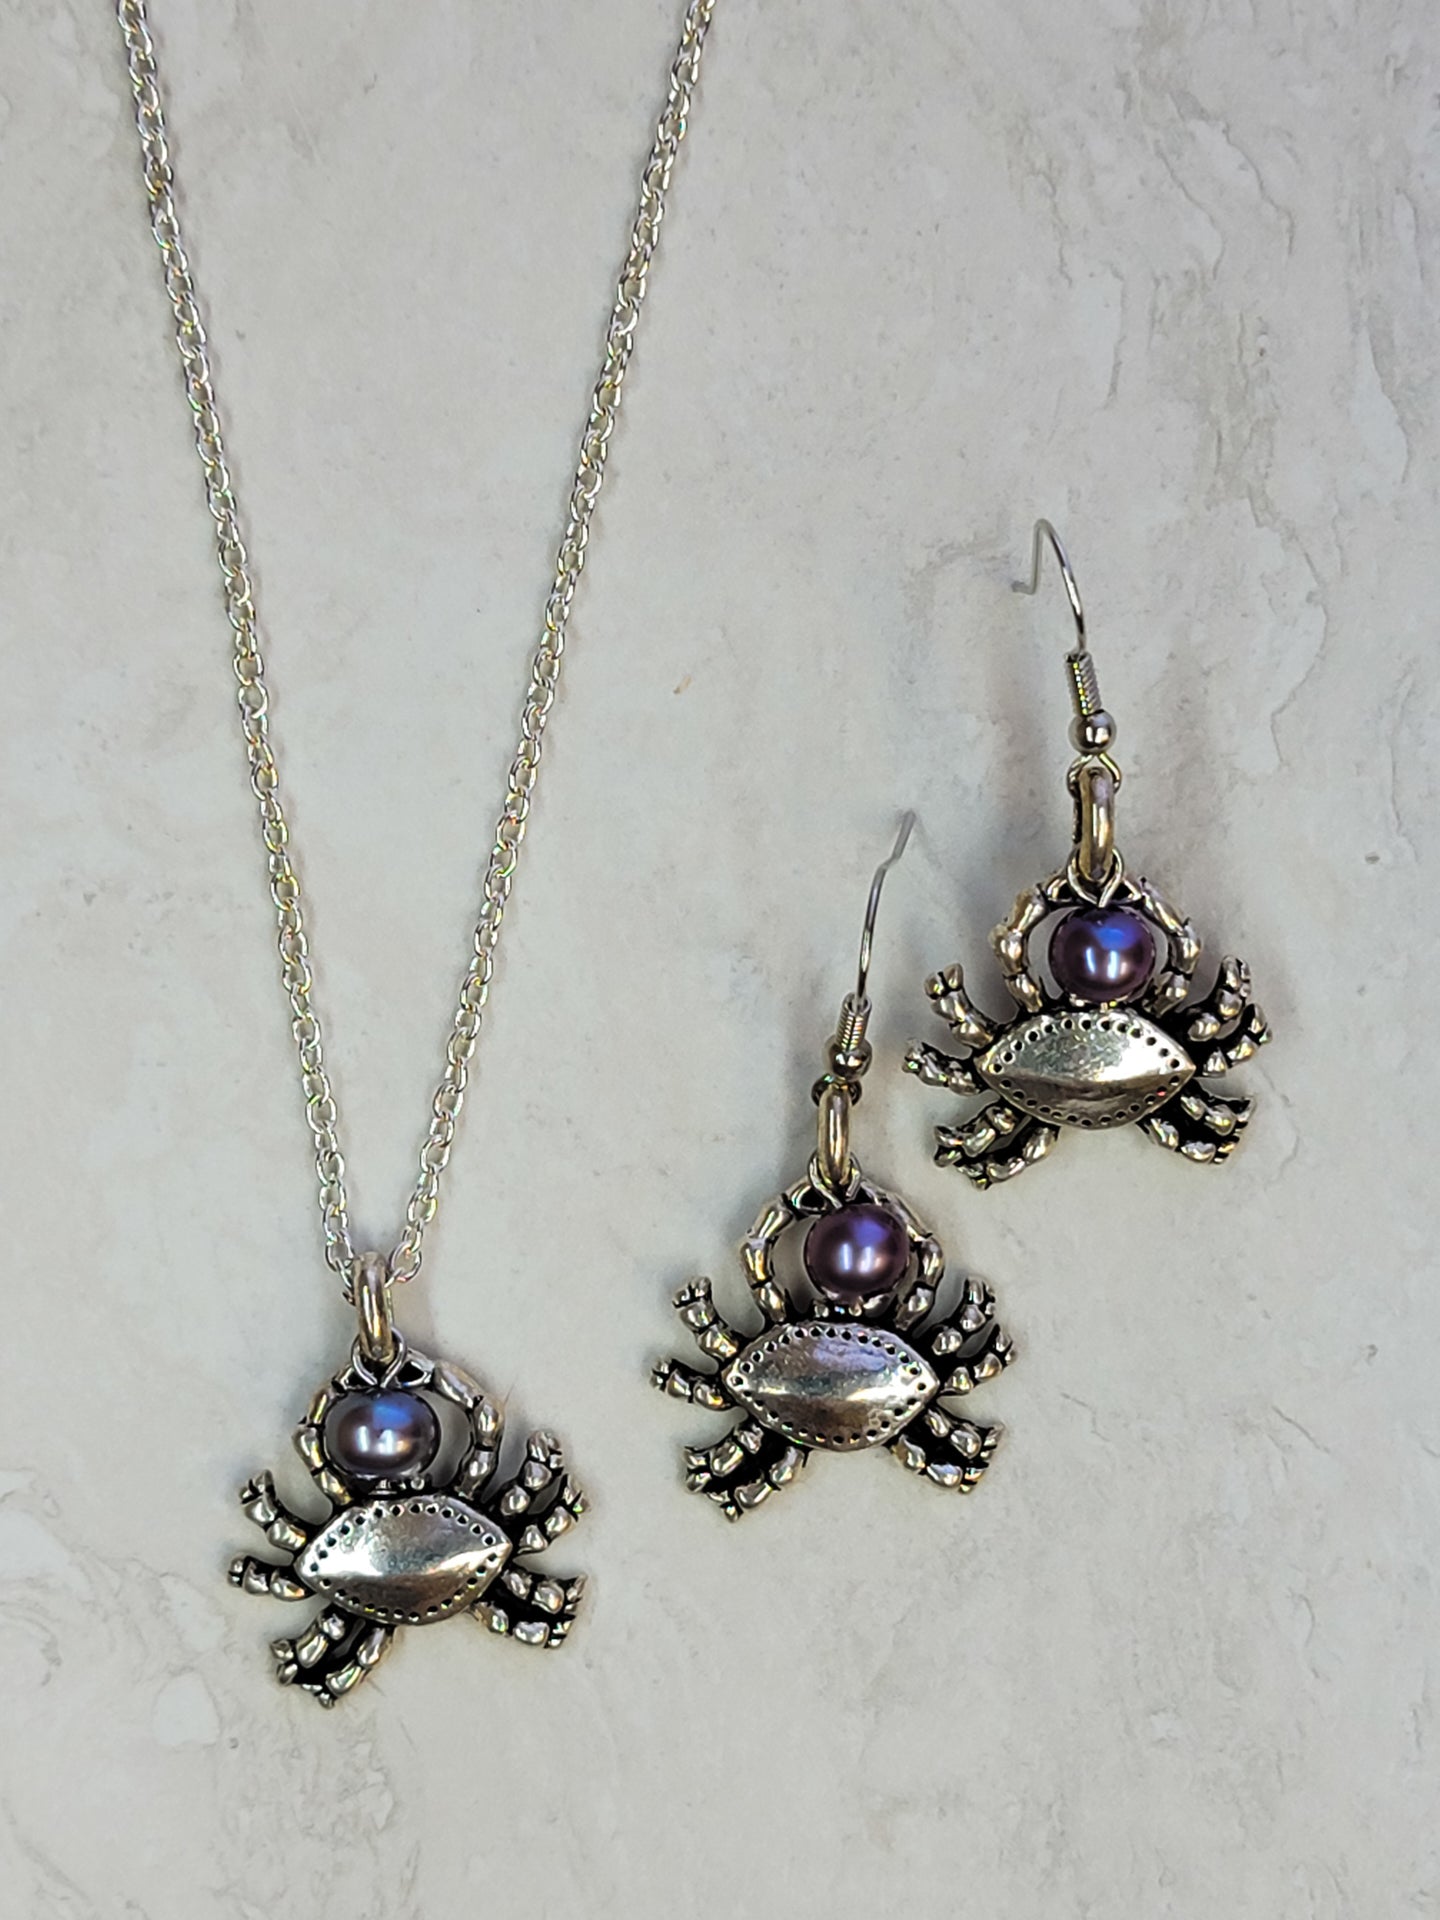 Crab & Pearl Jewelry Set - Silver - Matching Necklace & Earrings - One Of A Kind